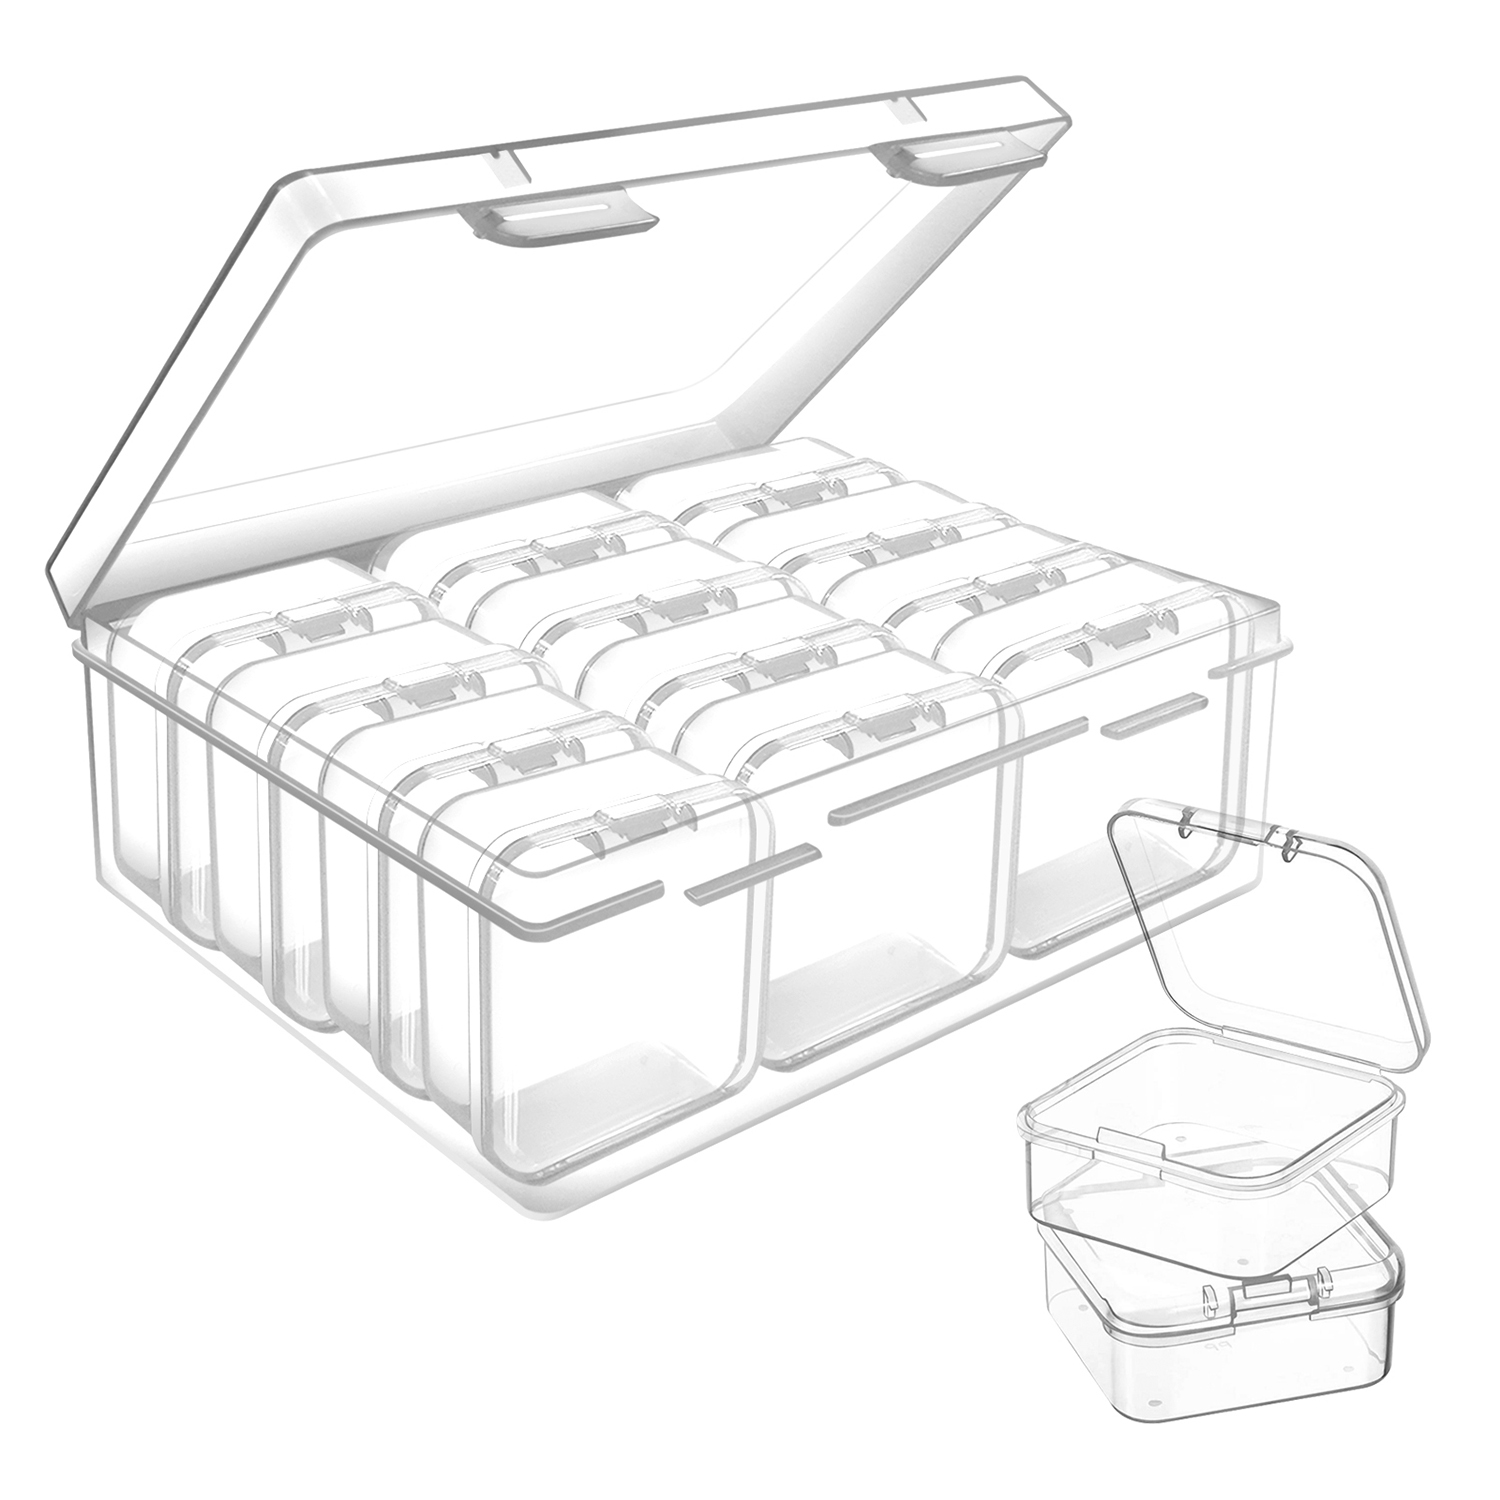  MULIANBOX 12 Pack Small Plastic Box Clear Bead Boxes Craft  Storage Containers with Lids for Organizing Beads, Jewelry Making, Small  Items, 1.38x1.38x0.78inch : Arts, Crafts & Sewing